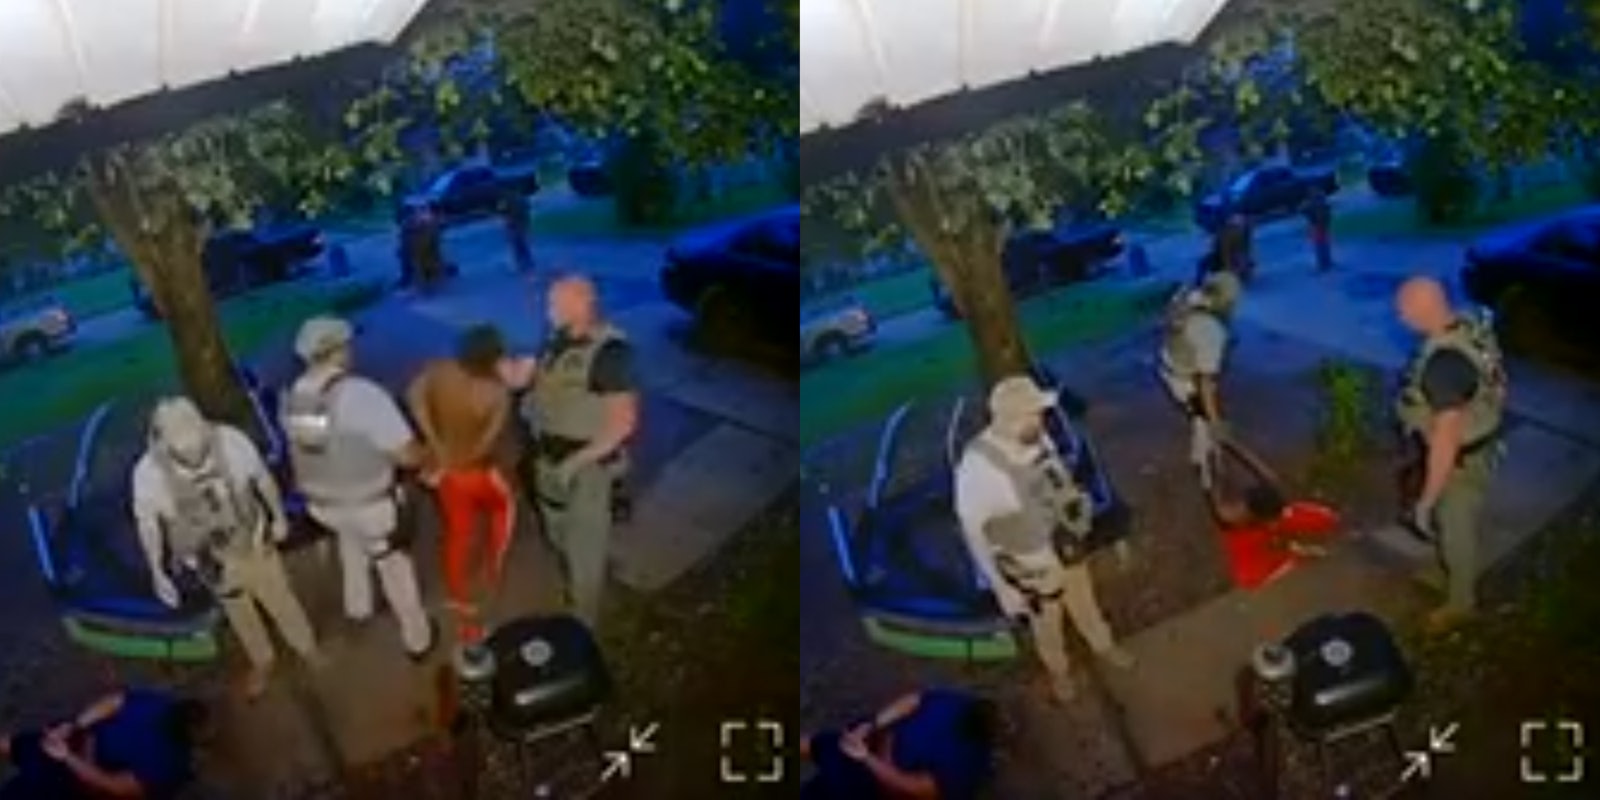 police punch handcuffed man in the face (l) police drag handcuffed man across the ground after he's fallen from being punched in the face